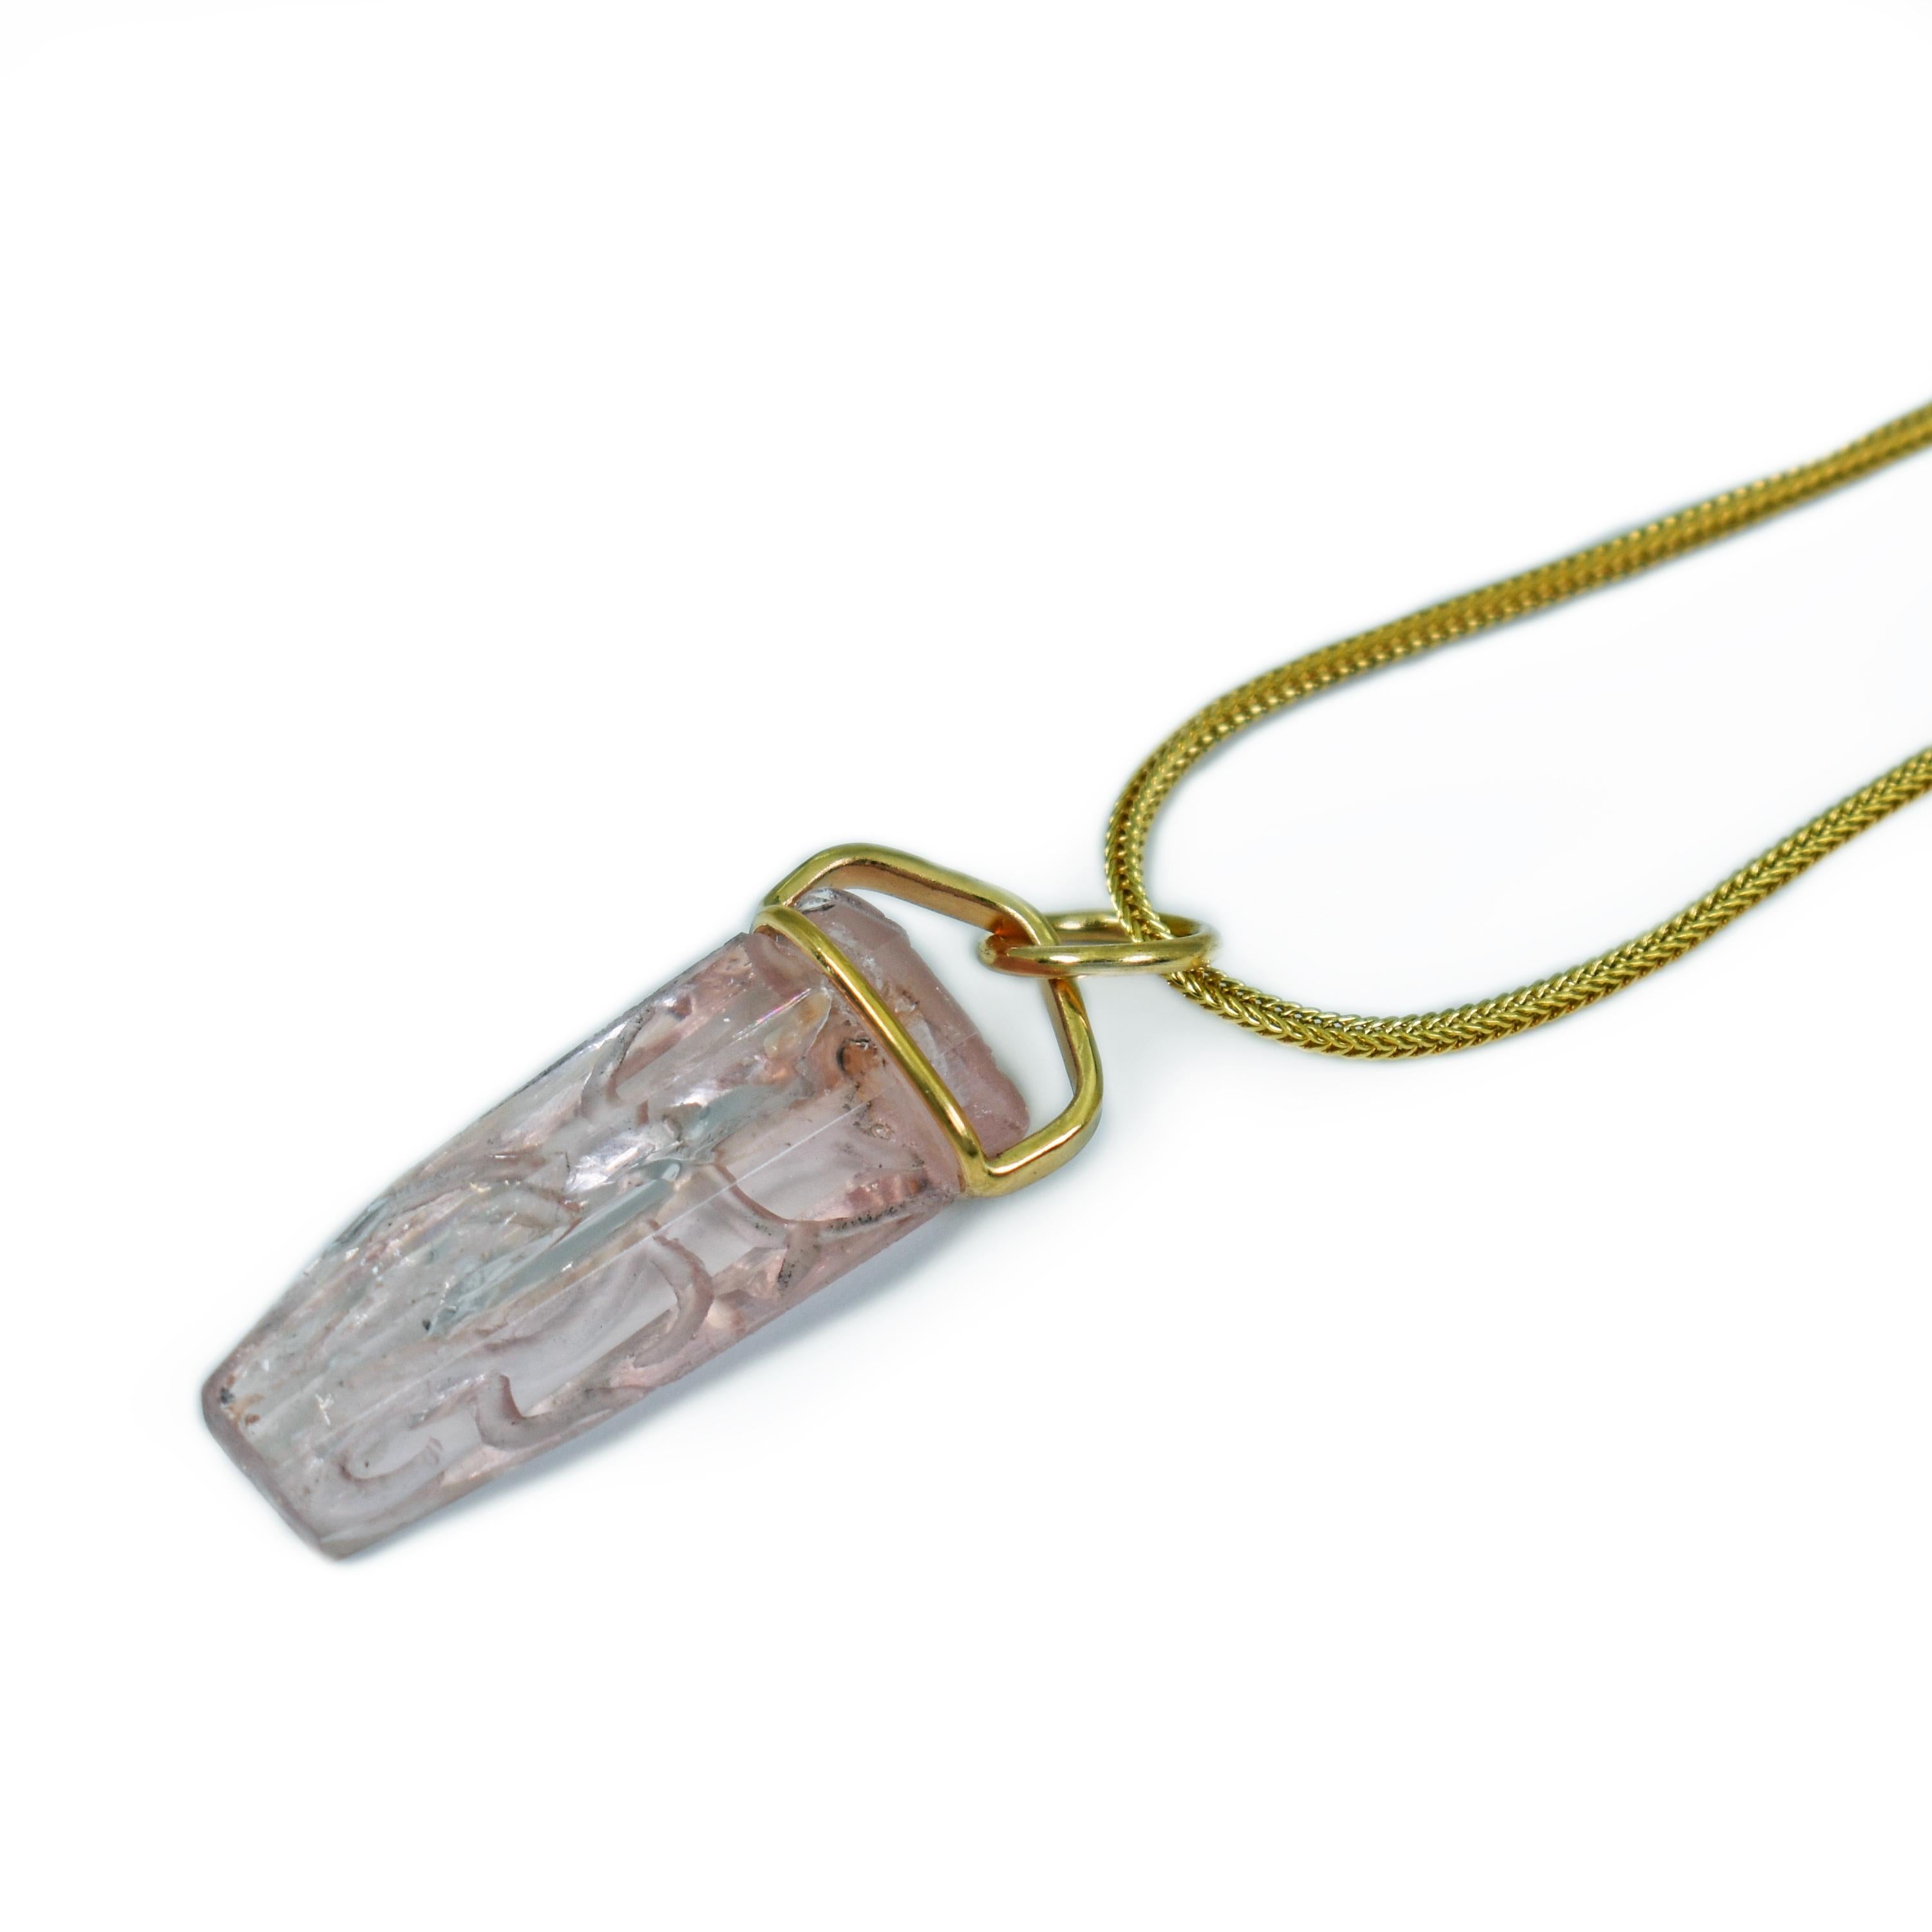 Beautiful hand-carved, rough Morganite crystal and 18k yellow gold pendant on a 16 inch 18k gold foxtail chain necklace. Pendant, including bail, is 1.57 inches or 40mm in length. Gorgeous, carved vine design in this blush pink Morganite gemstone